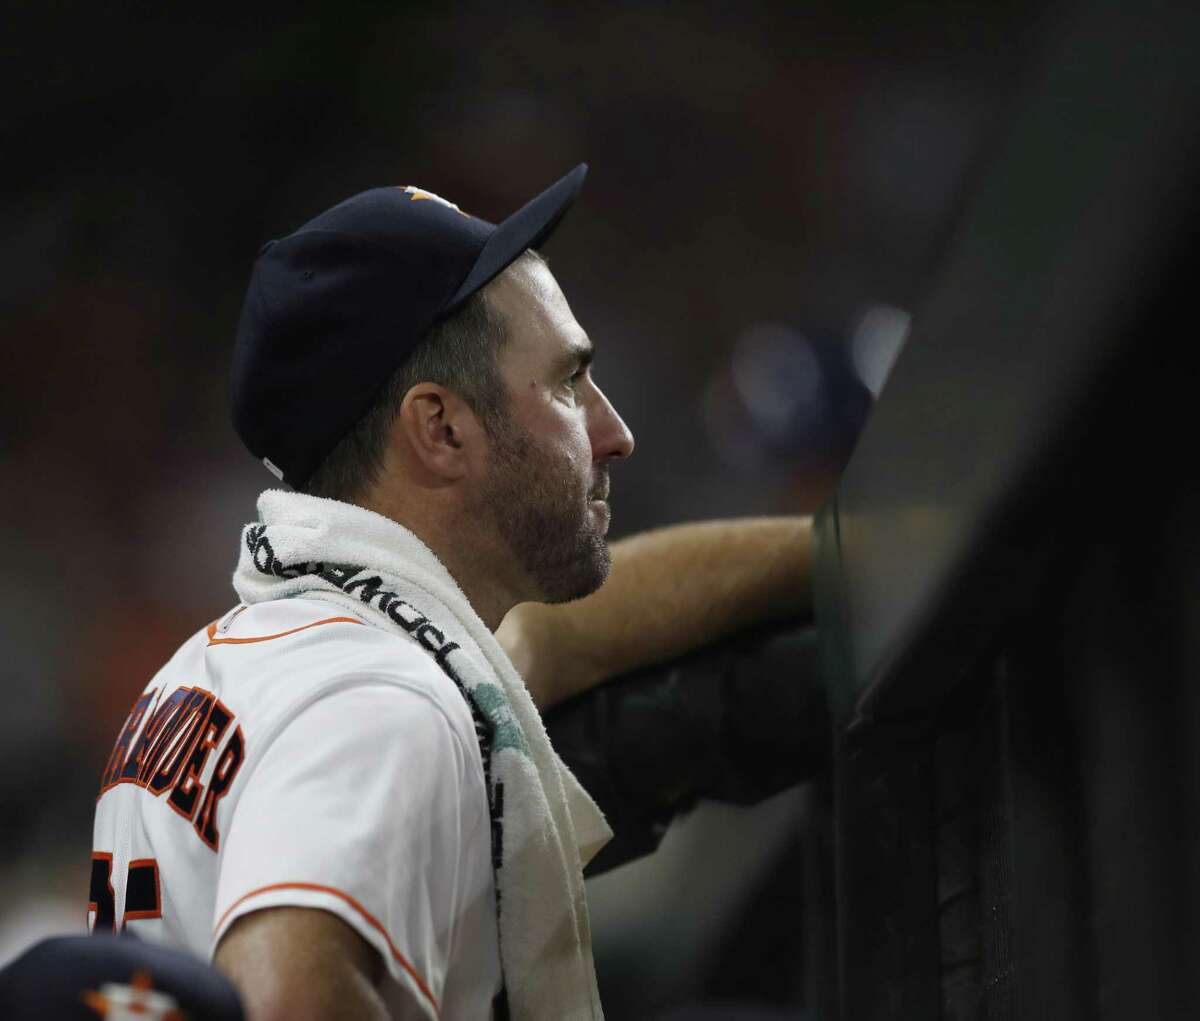 Houston Astros starting pitcher Justin Verlander (35) watches the game from the dugout during the eighth inning of an MLB game at Minute Maid Park, Tuesday, May 1, 2018, in Houston. ( Karen Warren / Houston Chronicle )